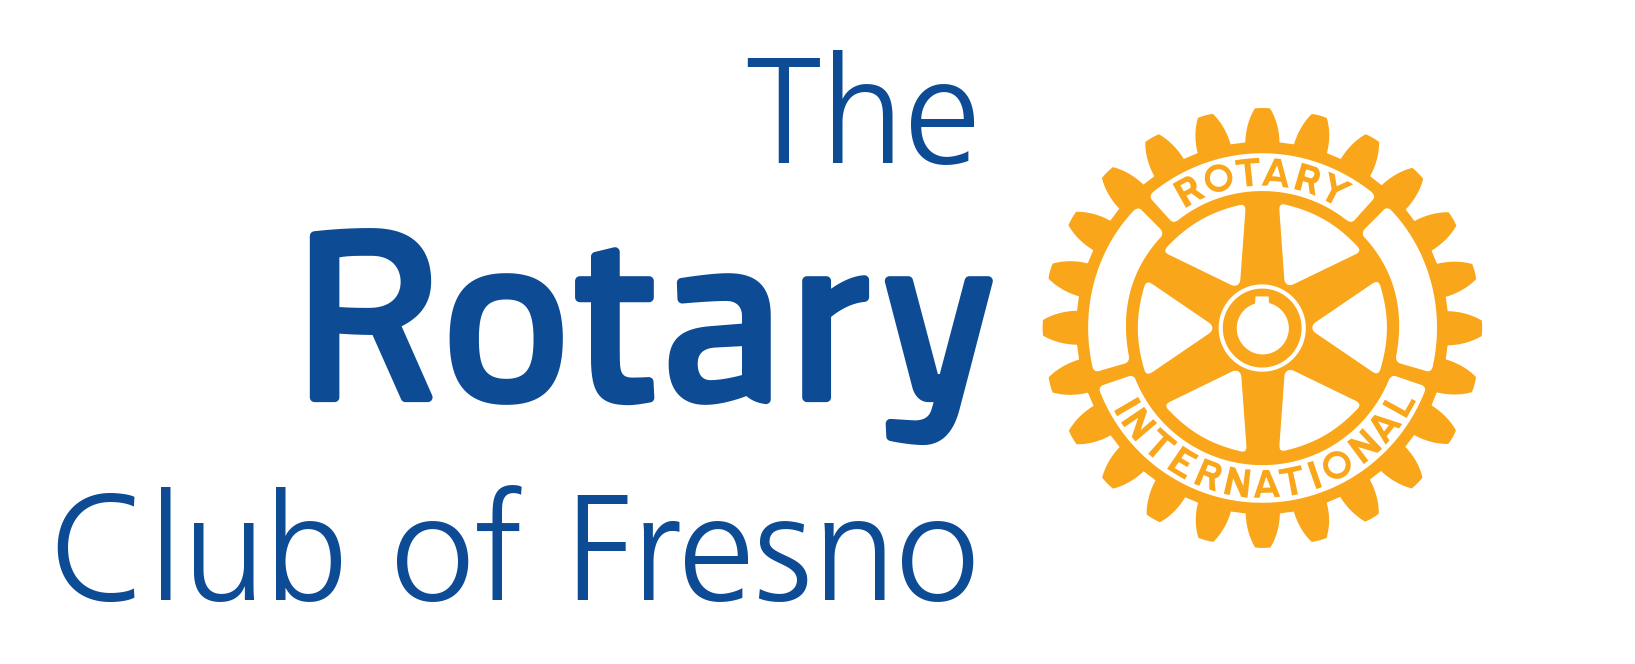 Tower District Rotary Club of Fresno